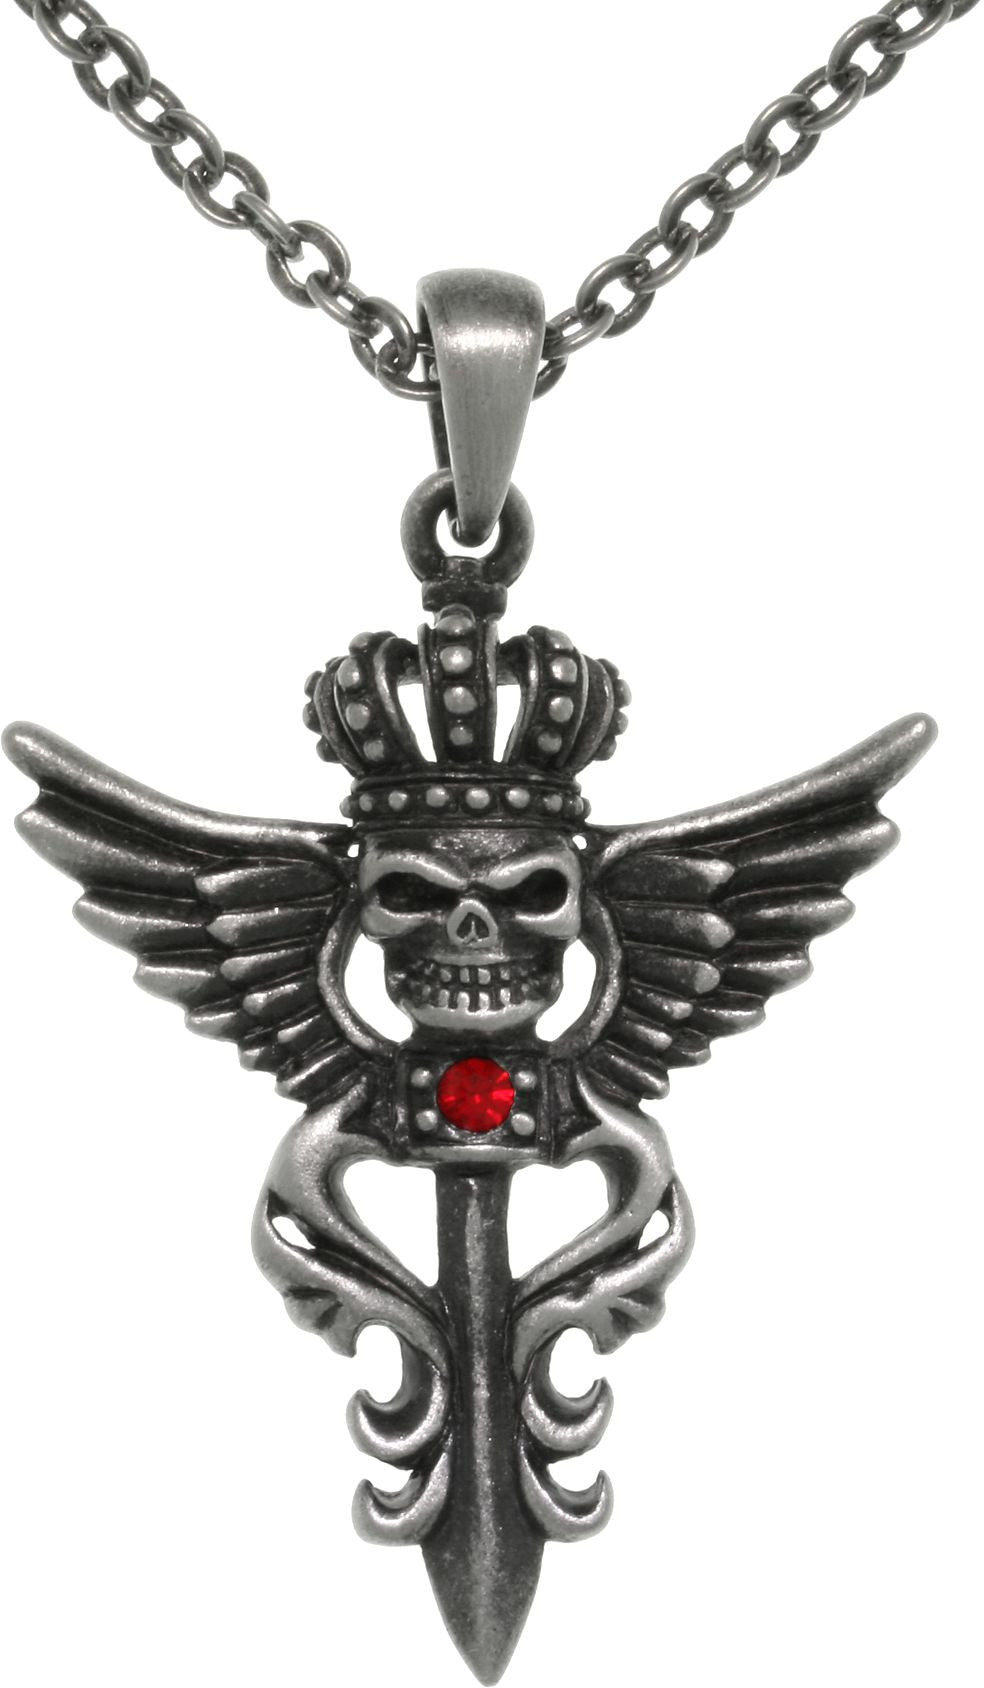 Jewelry Trends Pewter Winged Skull with Crown Pendant on 24 Inch Chain Necklace